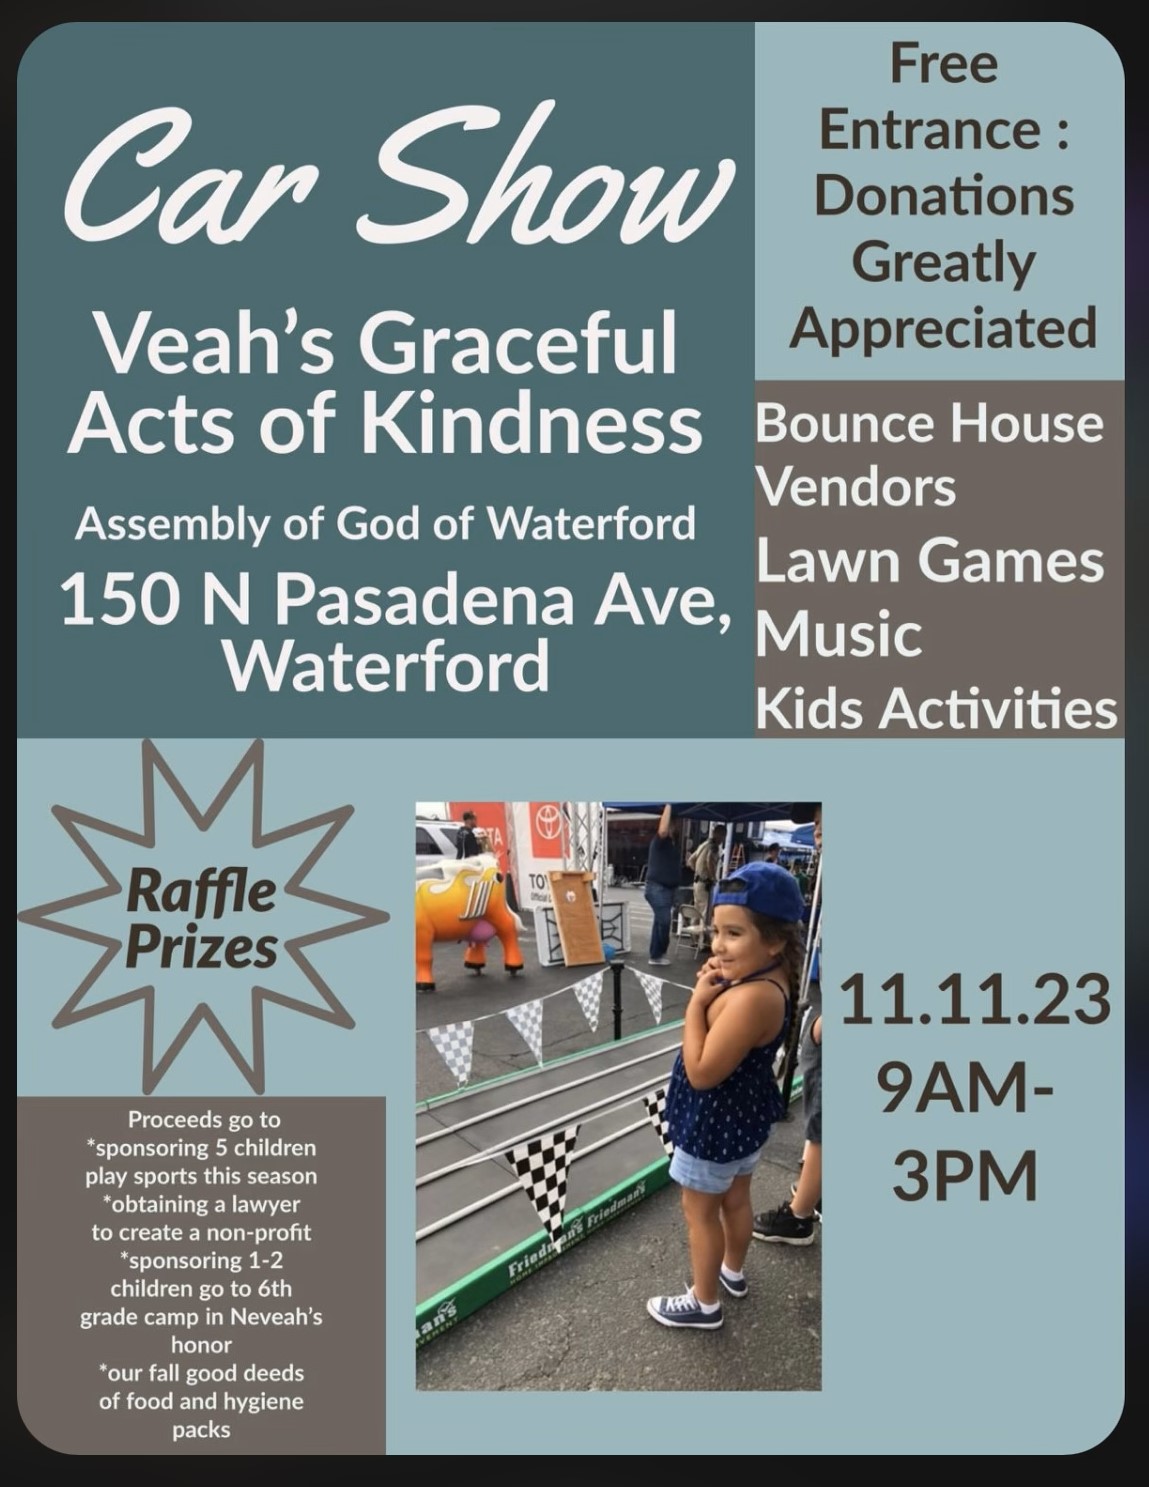 Veah' Graceful Acts of Kindness Car Show